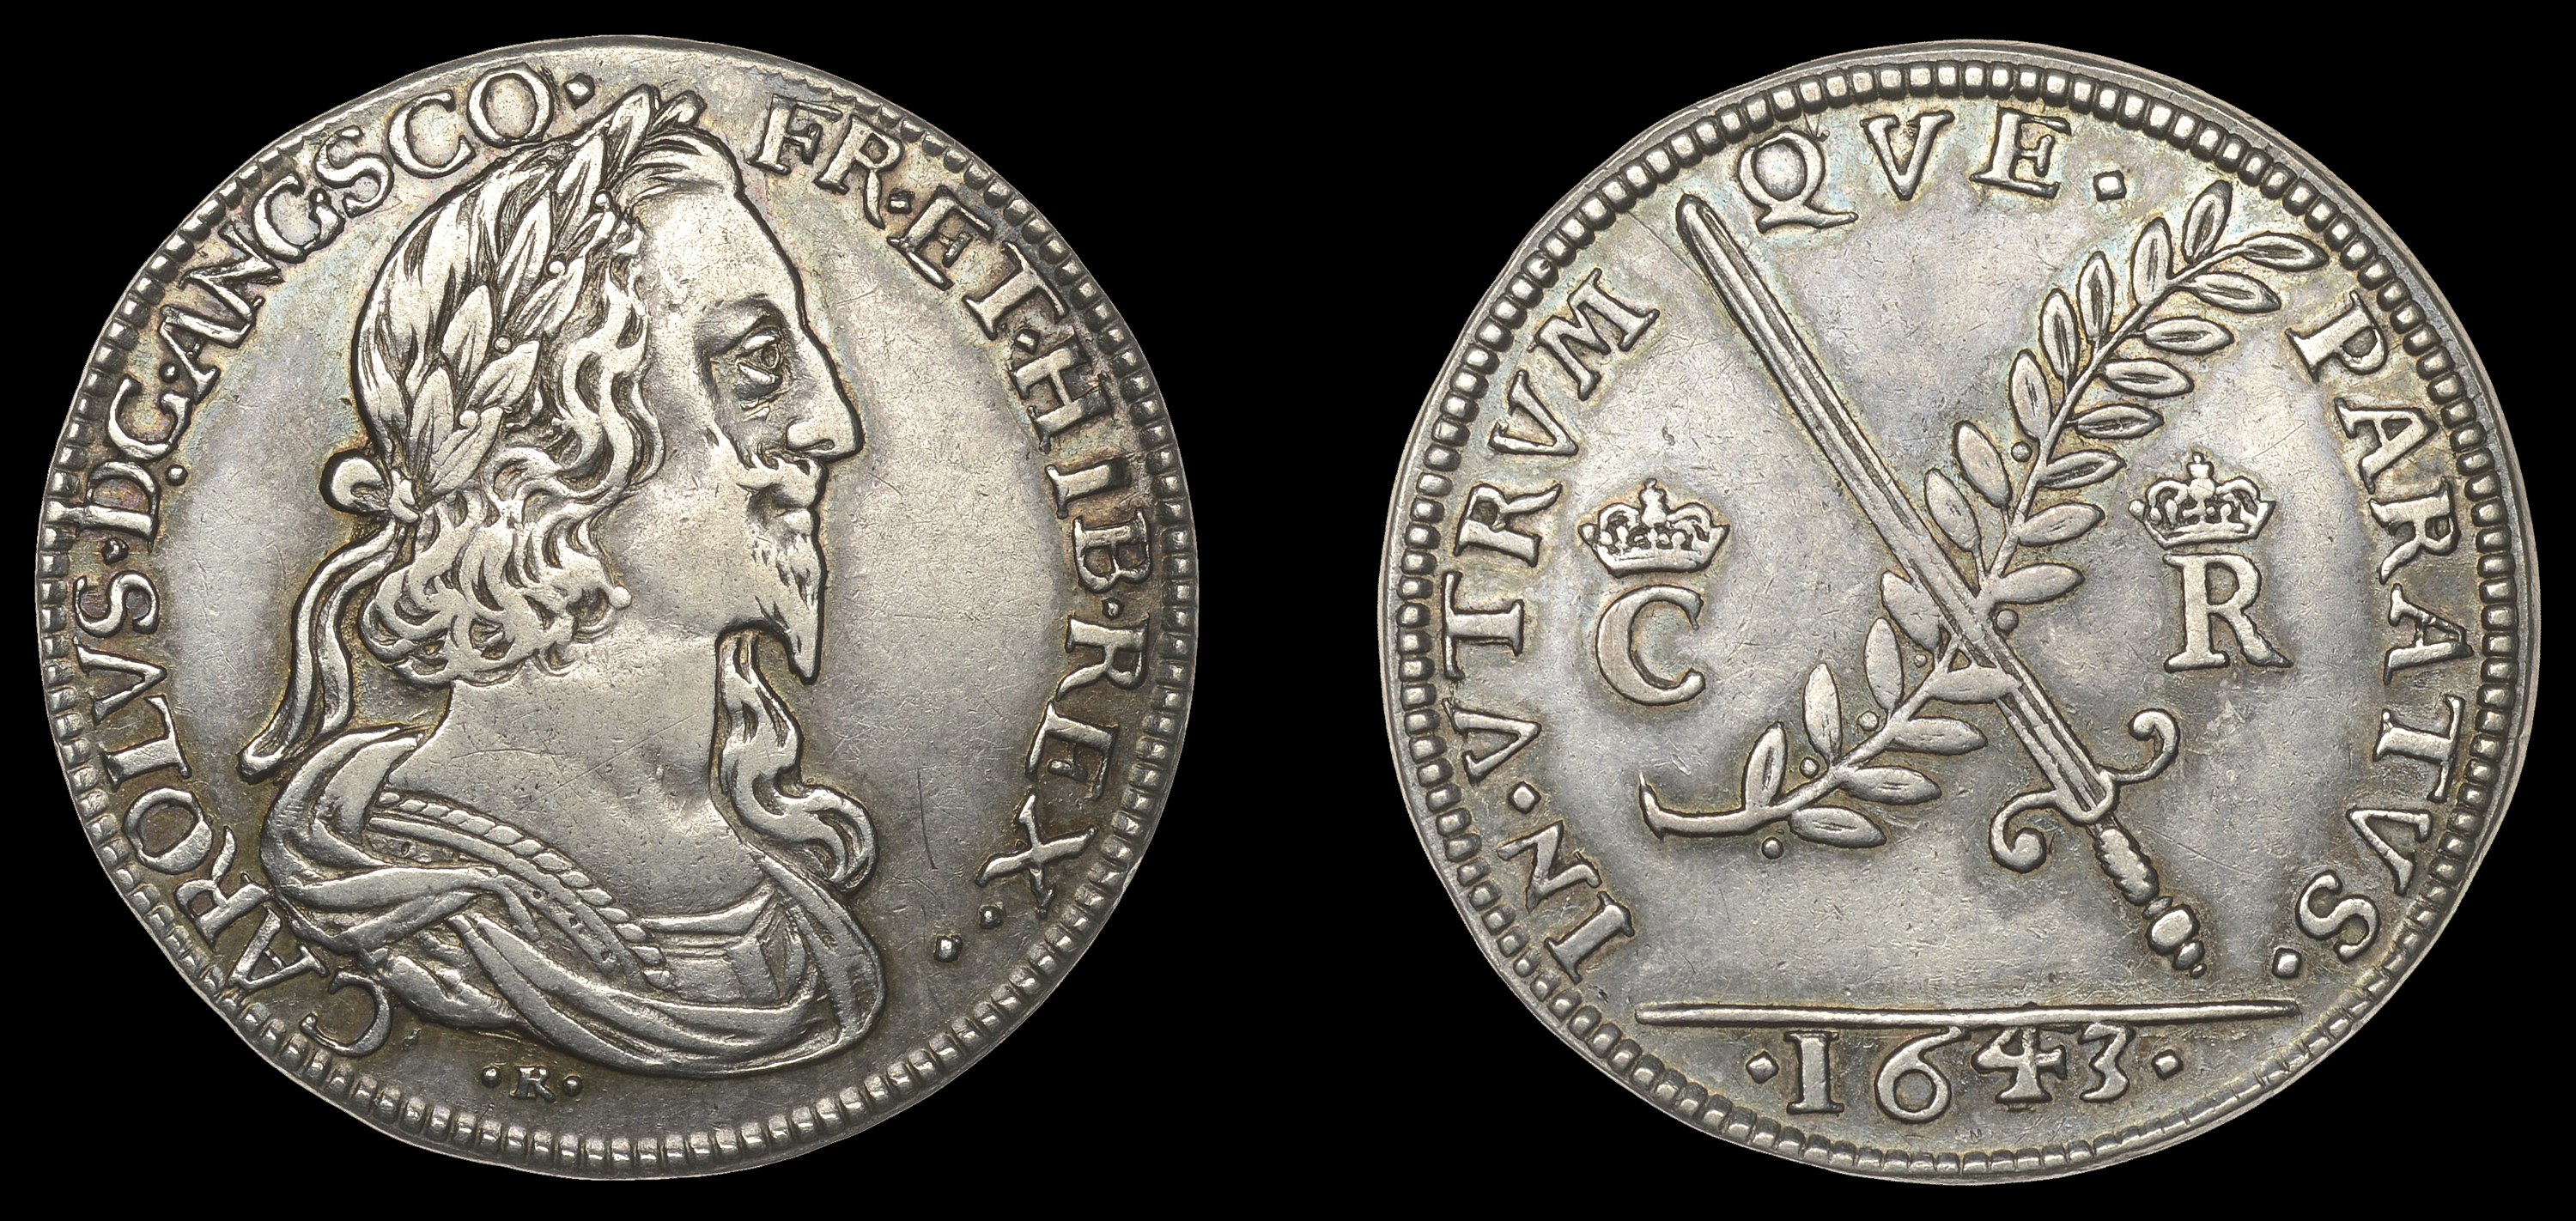 I: Briot, Warin and Rawlins, England, Peace or War, 1643, a struck silver medal by T. Rawlins,